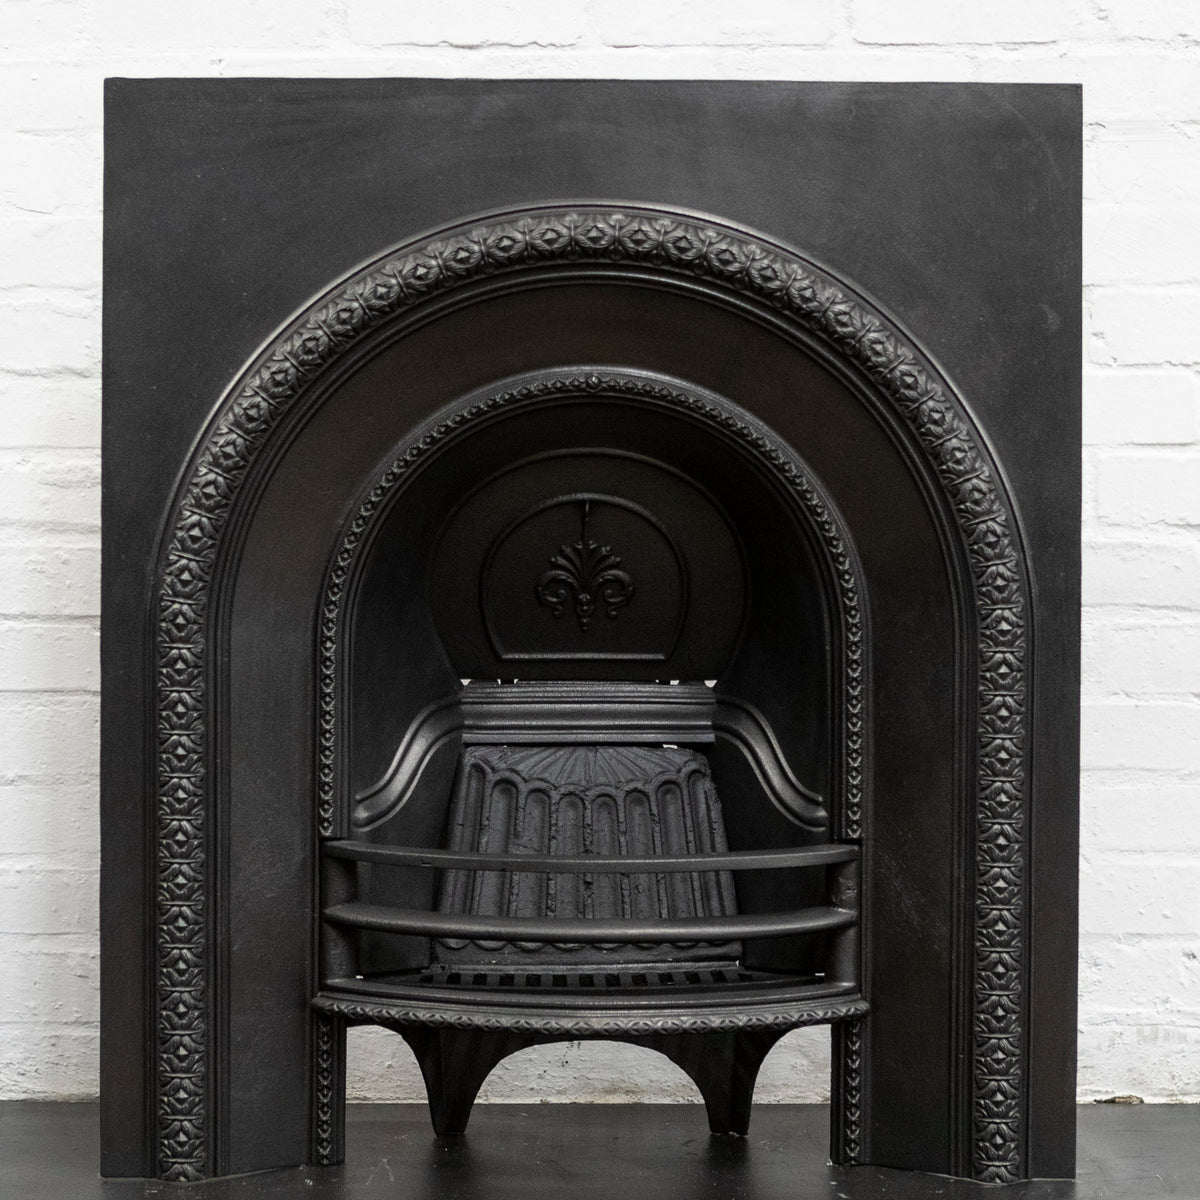 Antique Cast Iron Victorian Fireplace Insert | The Architectural Forum